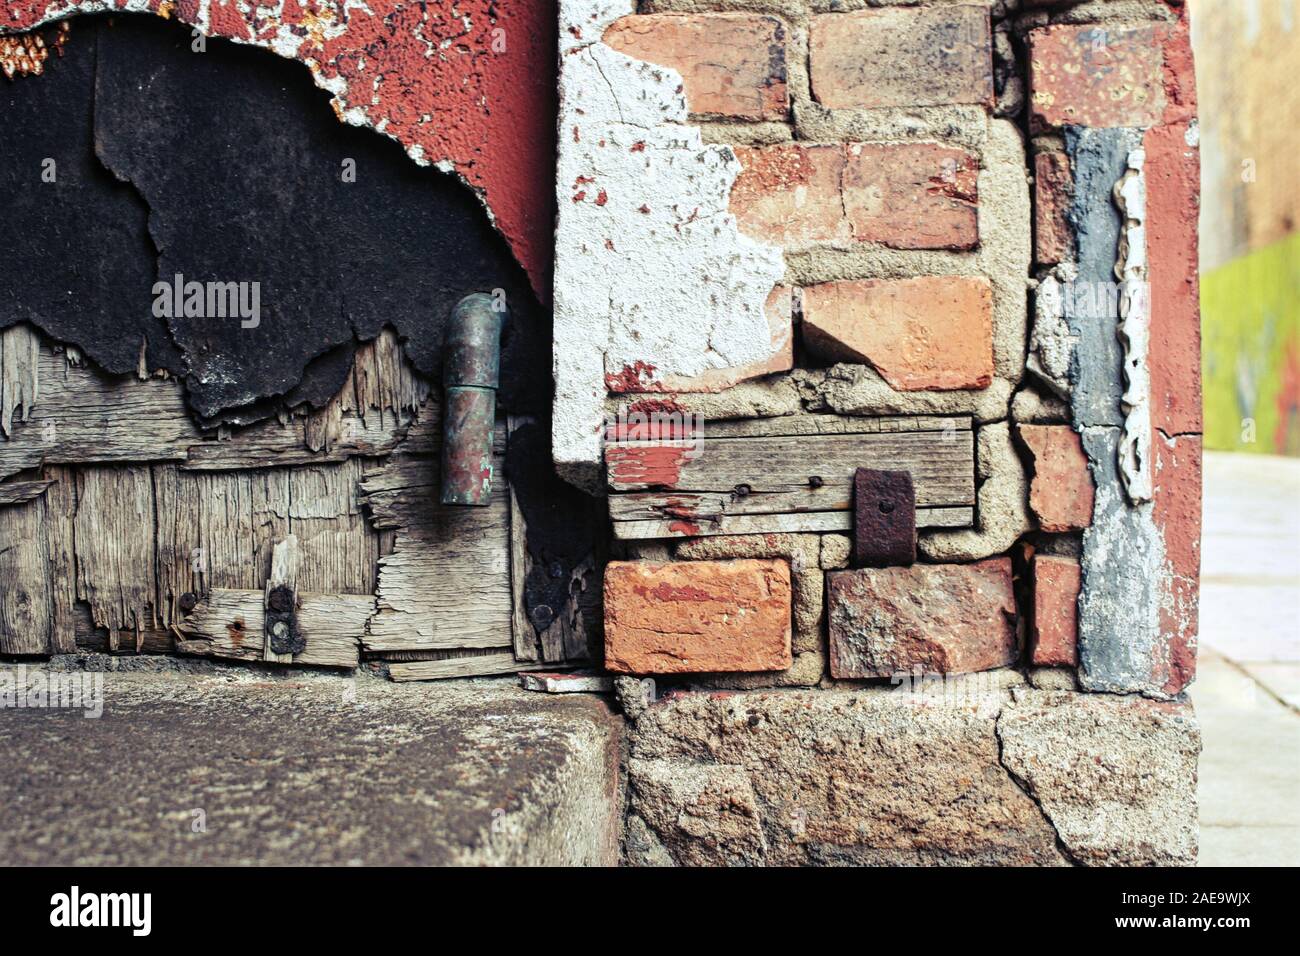 an old infrastructure crumbles, revealing textures Stock Photo